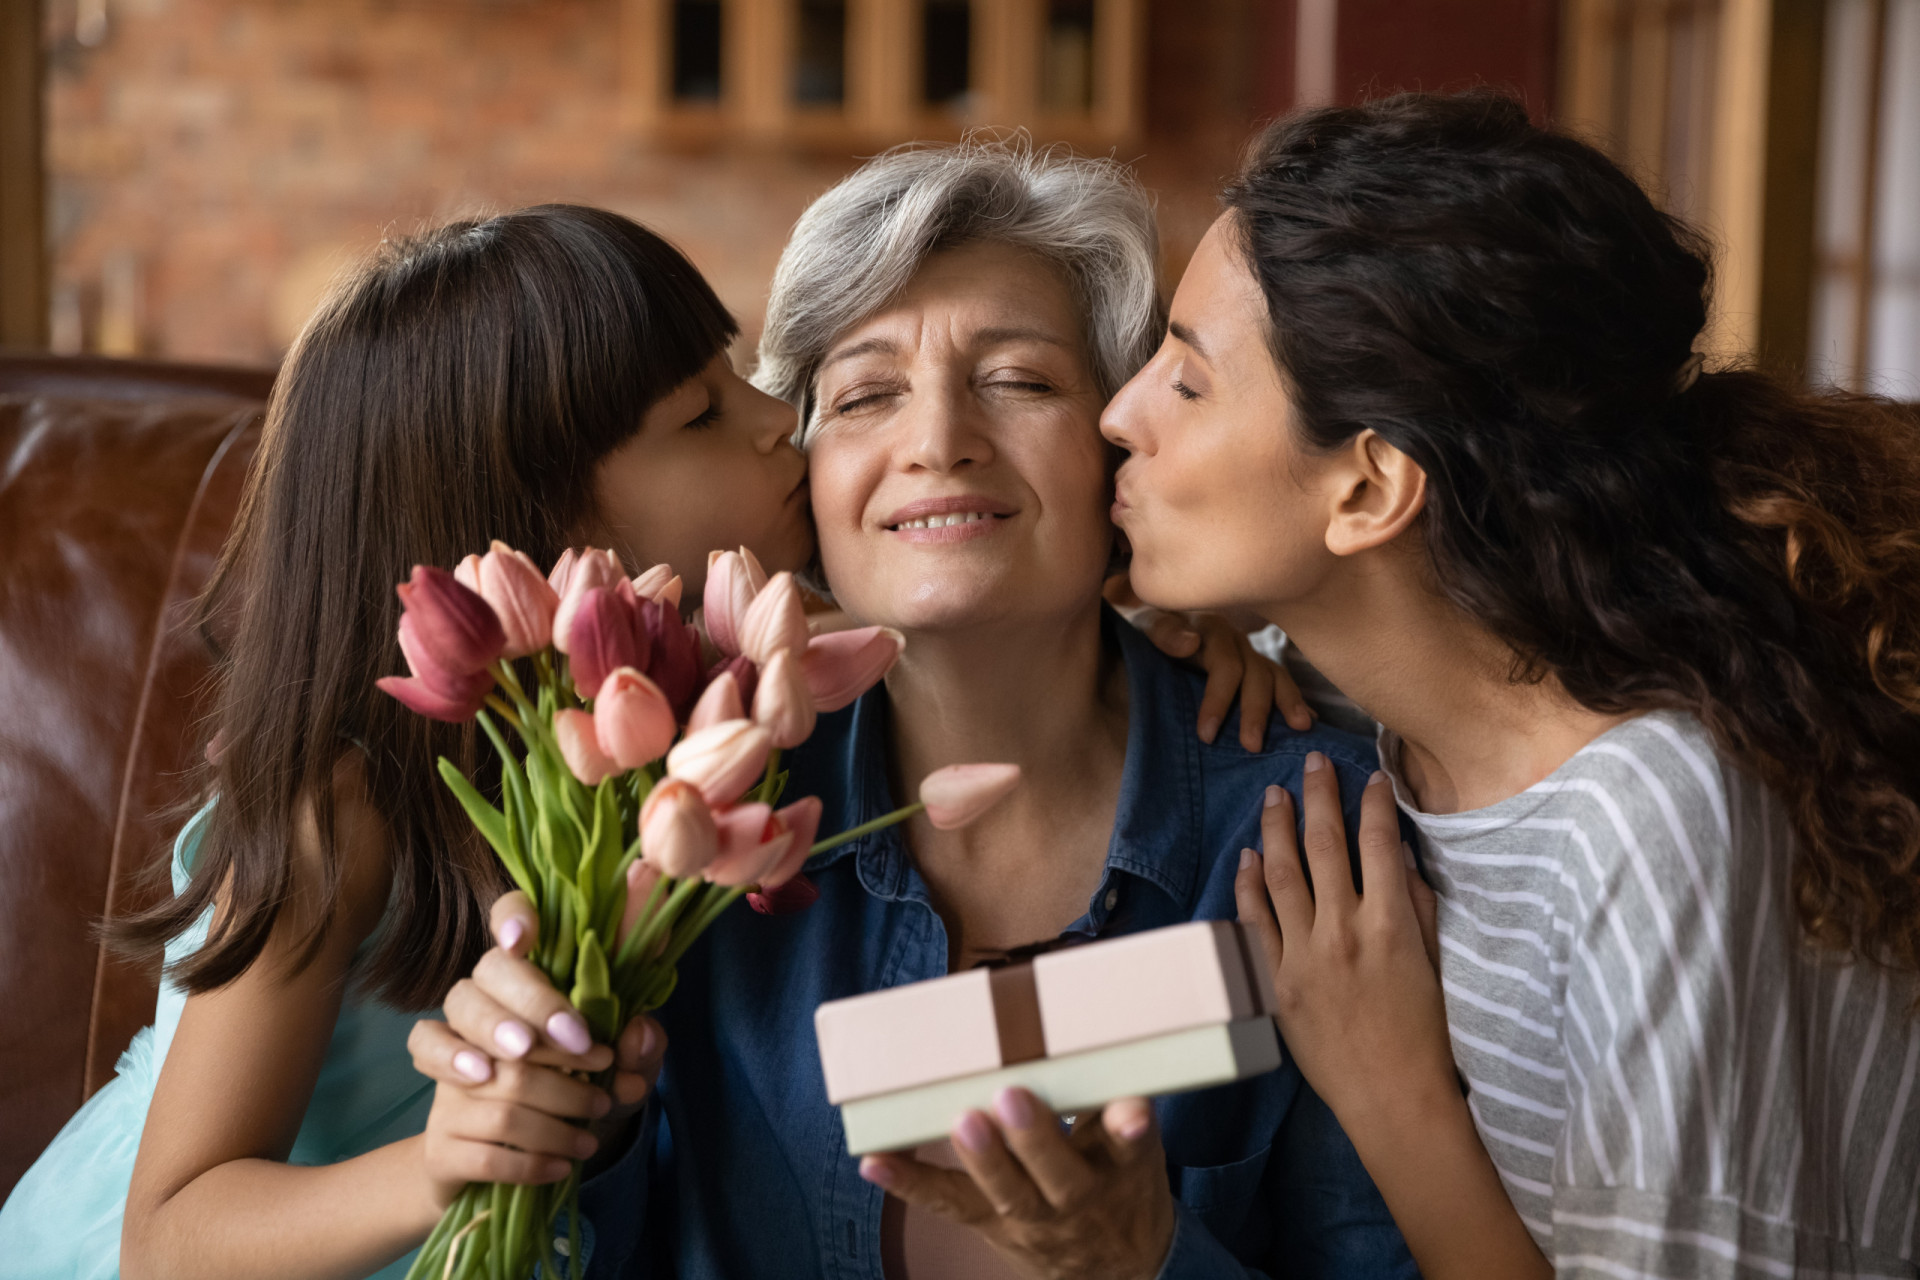 <p>A classic favorite is to send mom some flowers and chocolates. This is a quick way to tell her you love her and that she’s on your mind.</p><p>You may also like:<a href="https://www.starsinsider.com/n/445357?utm_source=msn.com&utm_medium=display&utm_campaign=referral_description&utm_content=708861en-us"> Check out the resemblance between these famous fathers and sons!</a></p>